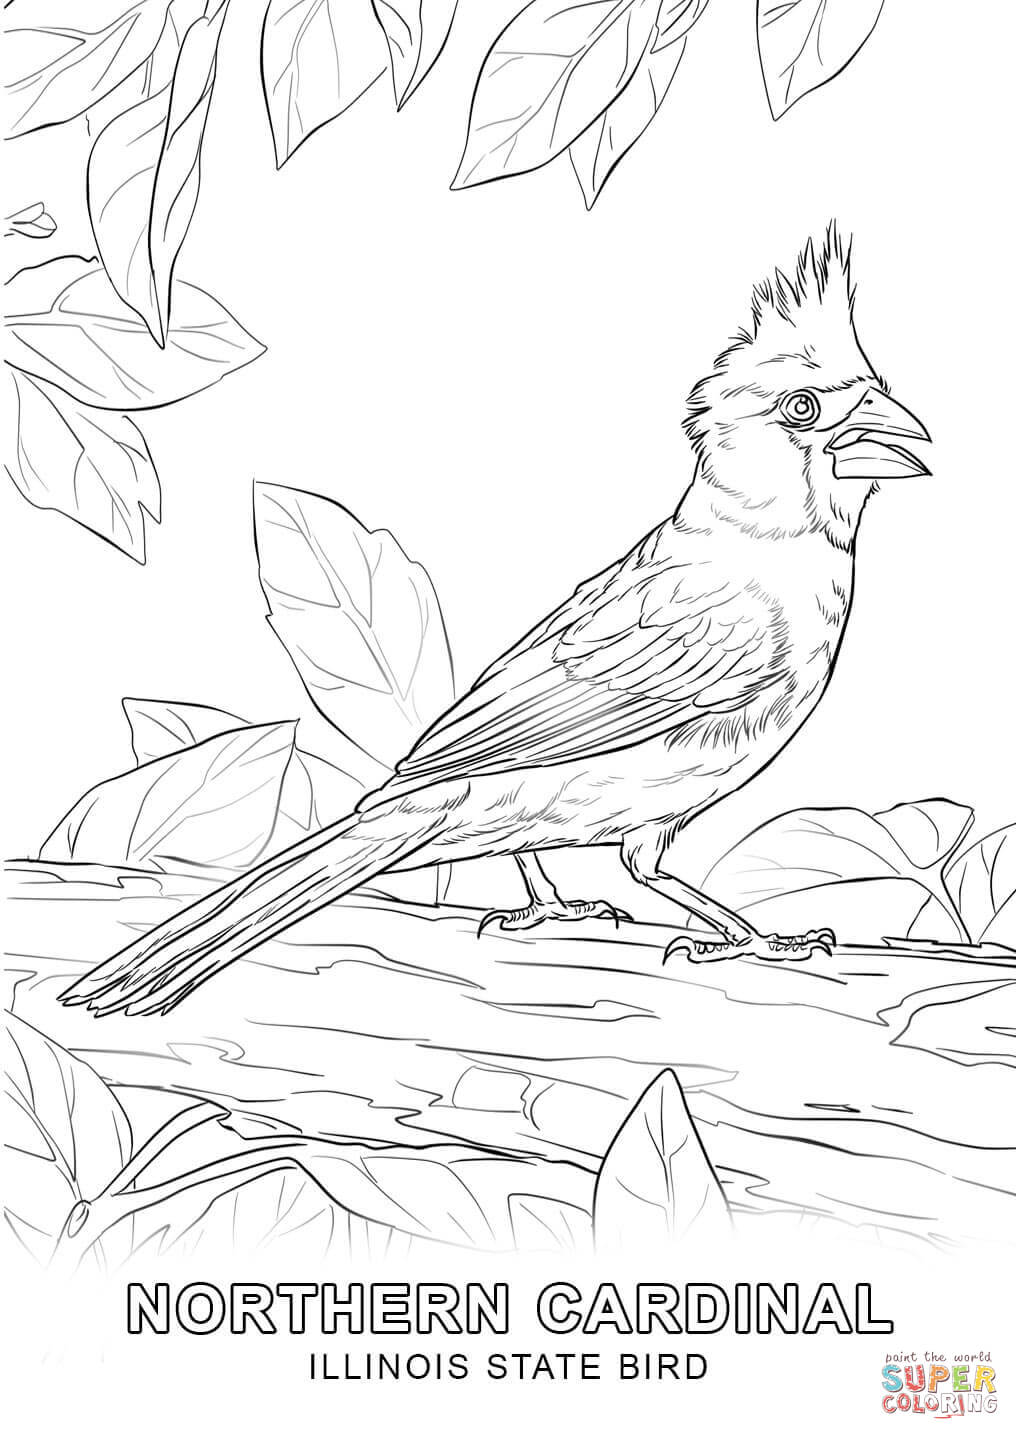 Illinois State Bird coloring page | Free Printable Coloring Pages